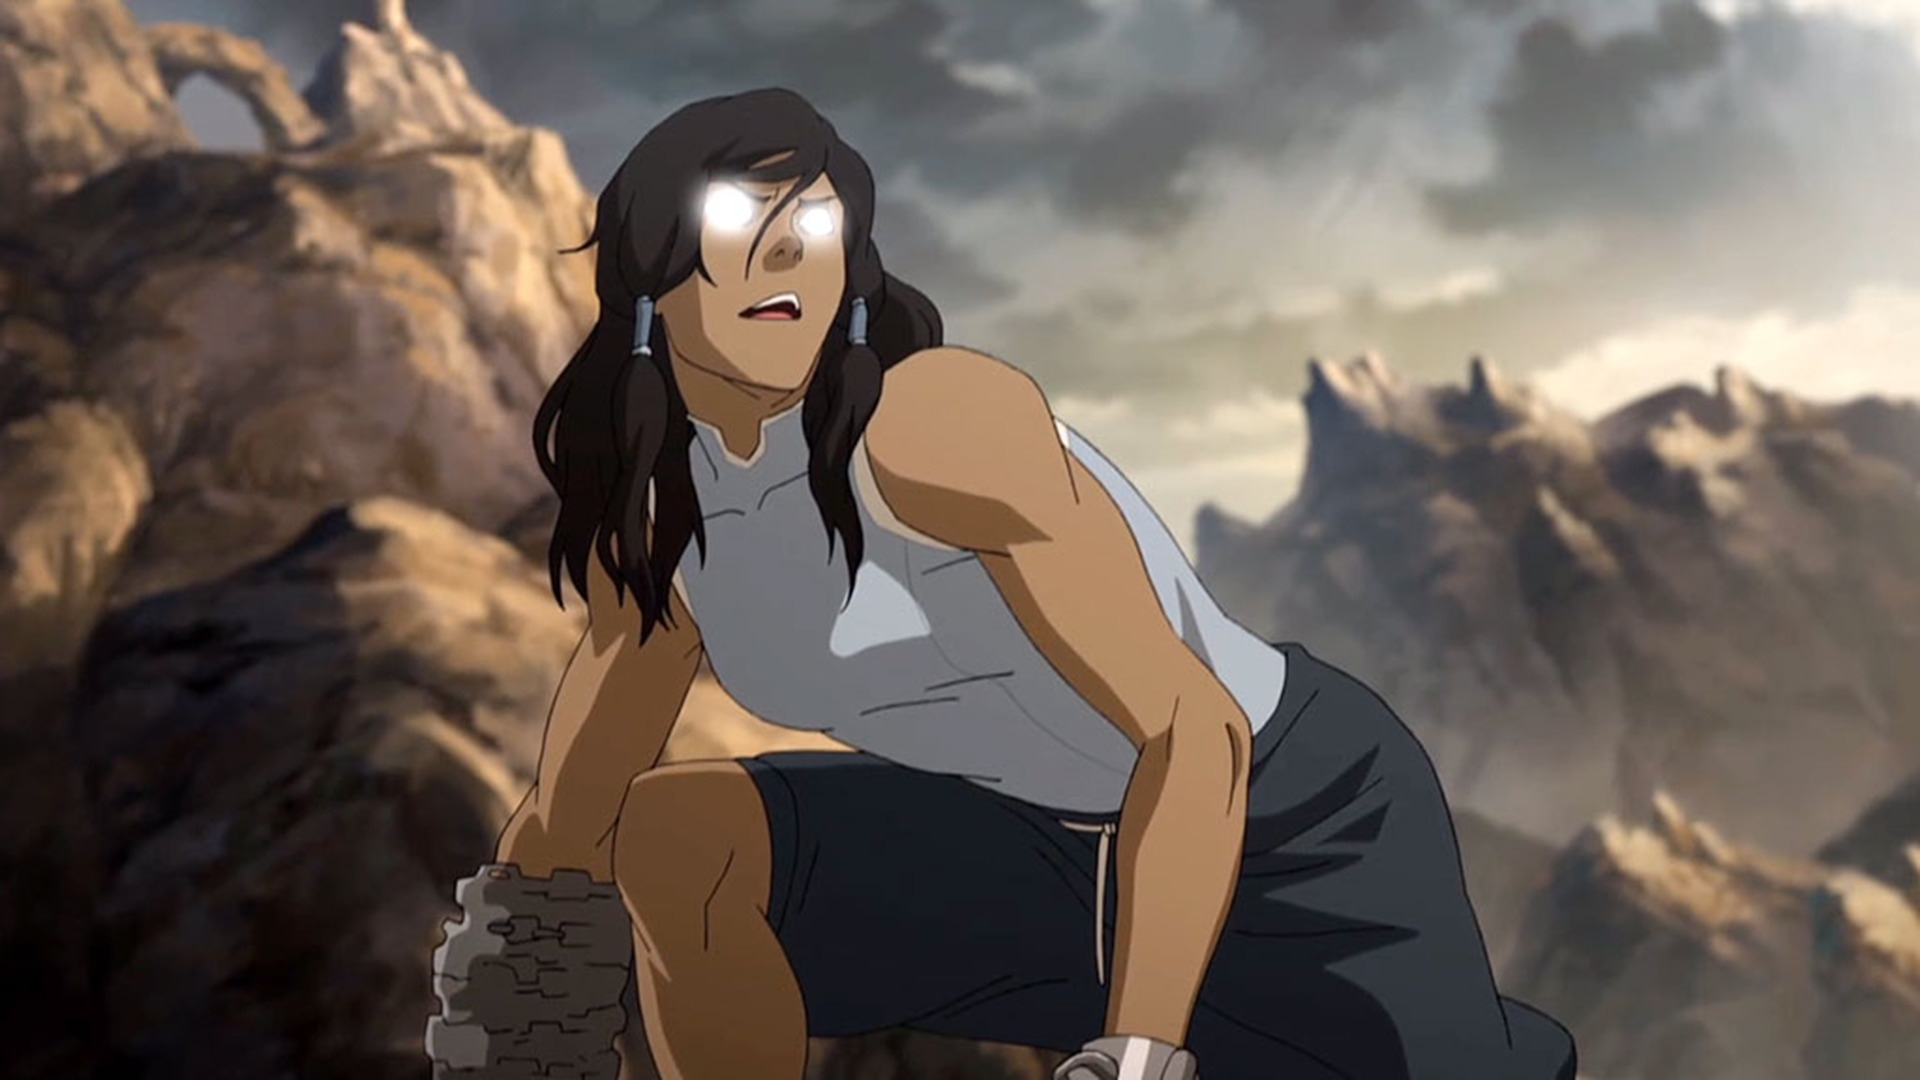 Every Season of Avatar The Last Airbender  The Legend of Korra RANKED   Articles on WatchMojocom